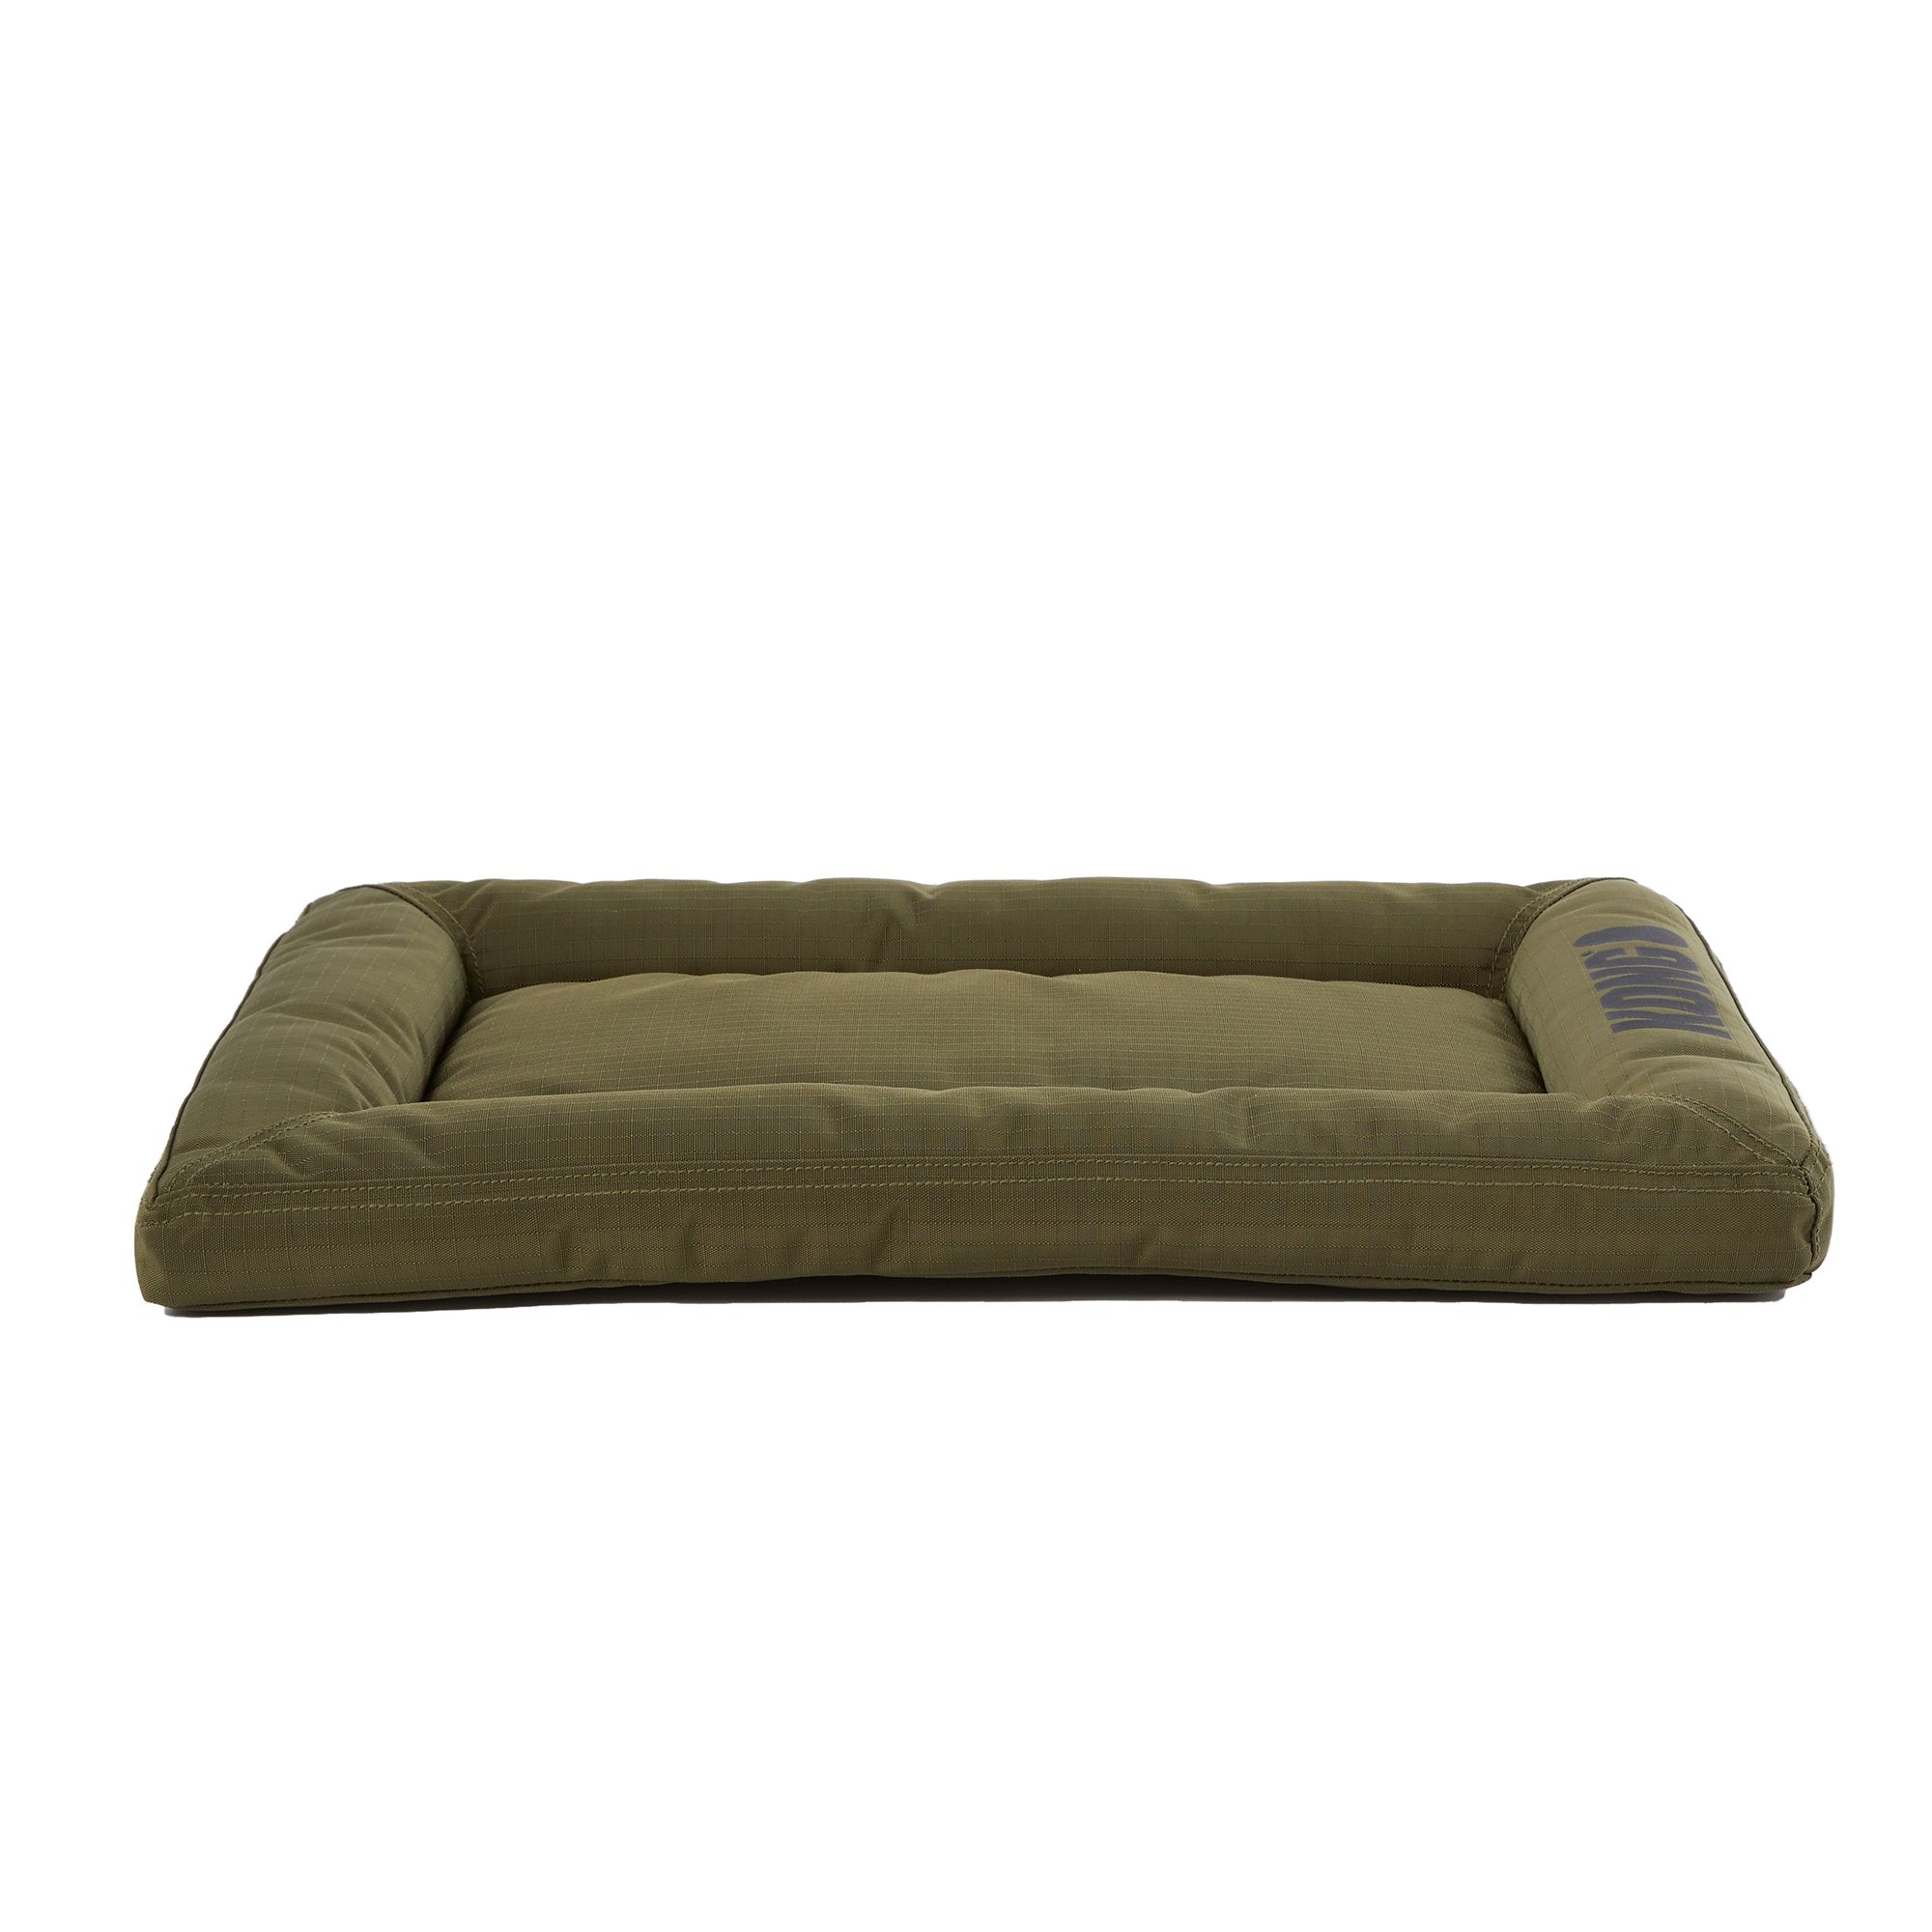 Kong Durable Crate Dog Mat in Olive, Size: 30L x 19W | Polyester PetSmart